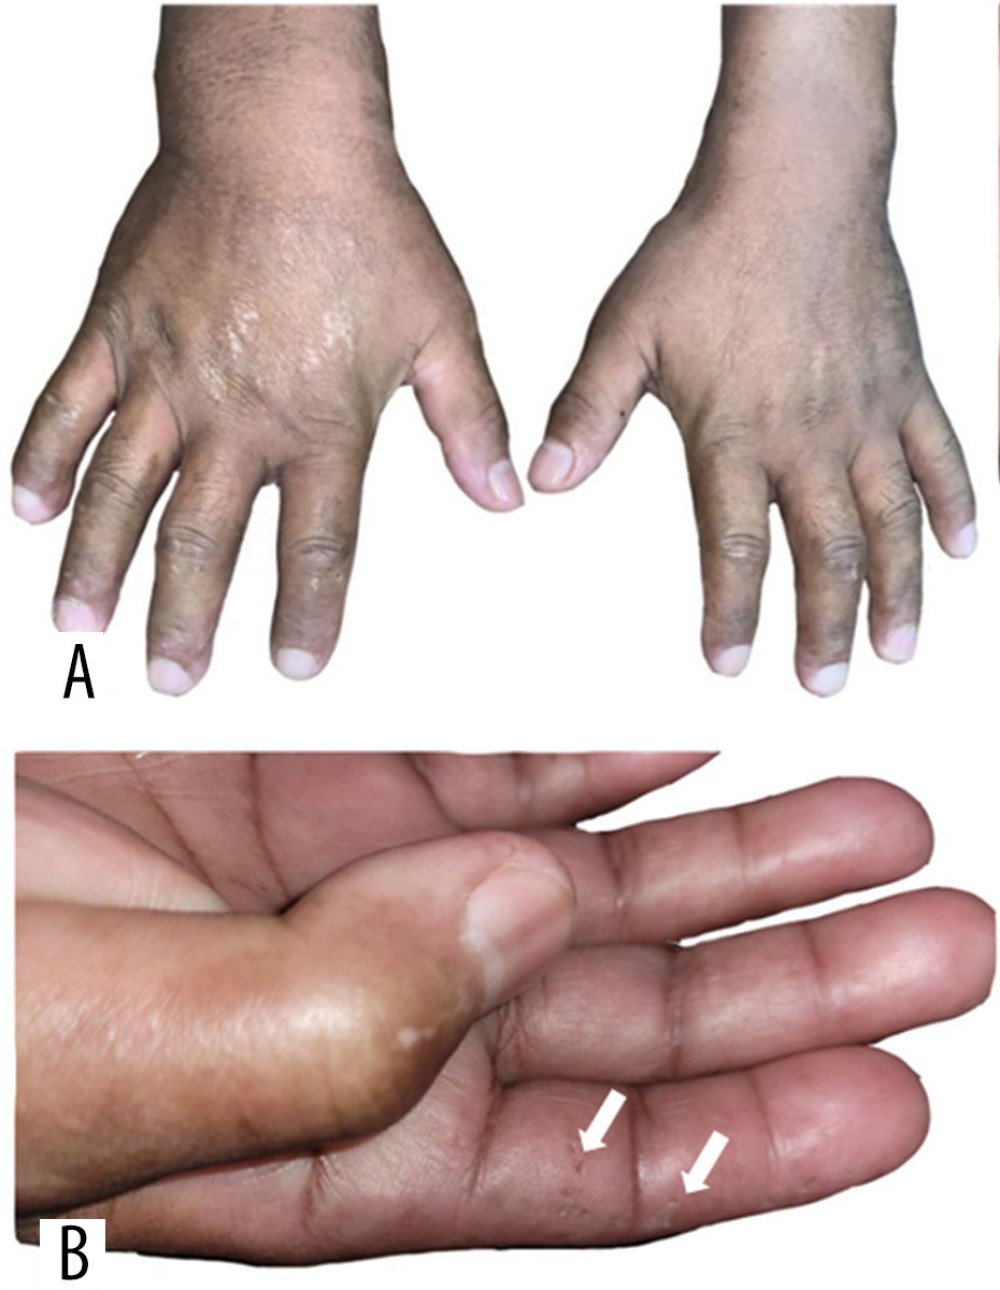 (A) Sclerodactyly. (B) Digital pitting (white arrows).